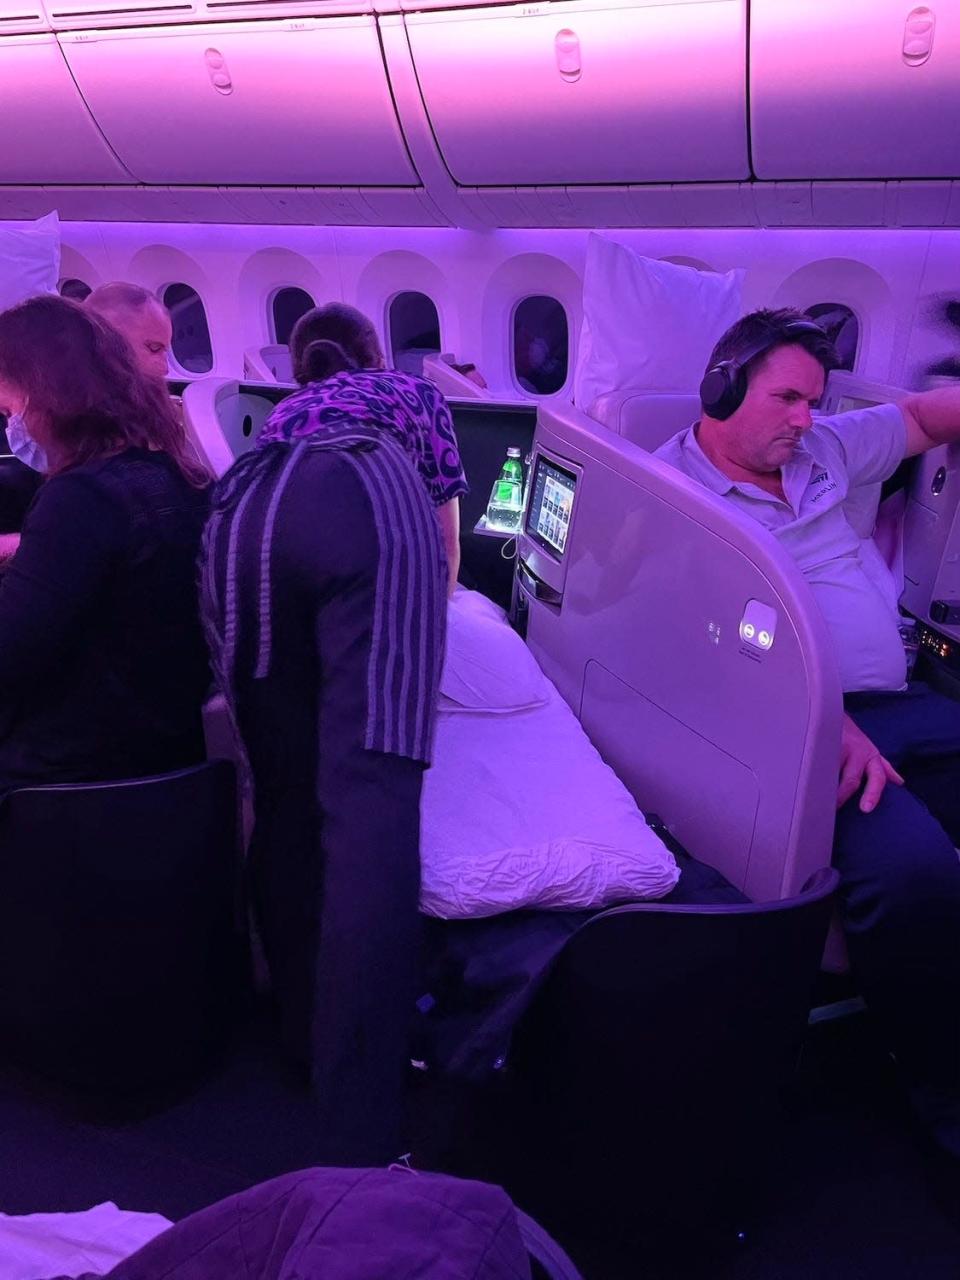 In the current cabin design, flight attendants have to convert the seats into beds for passengers.